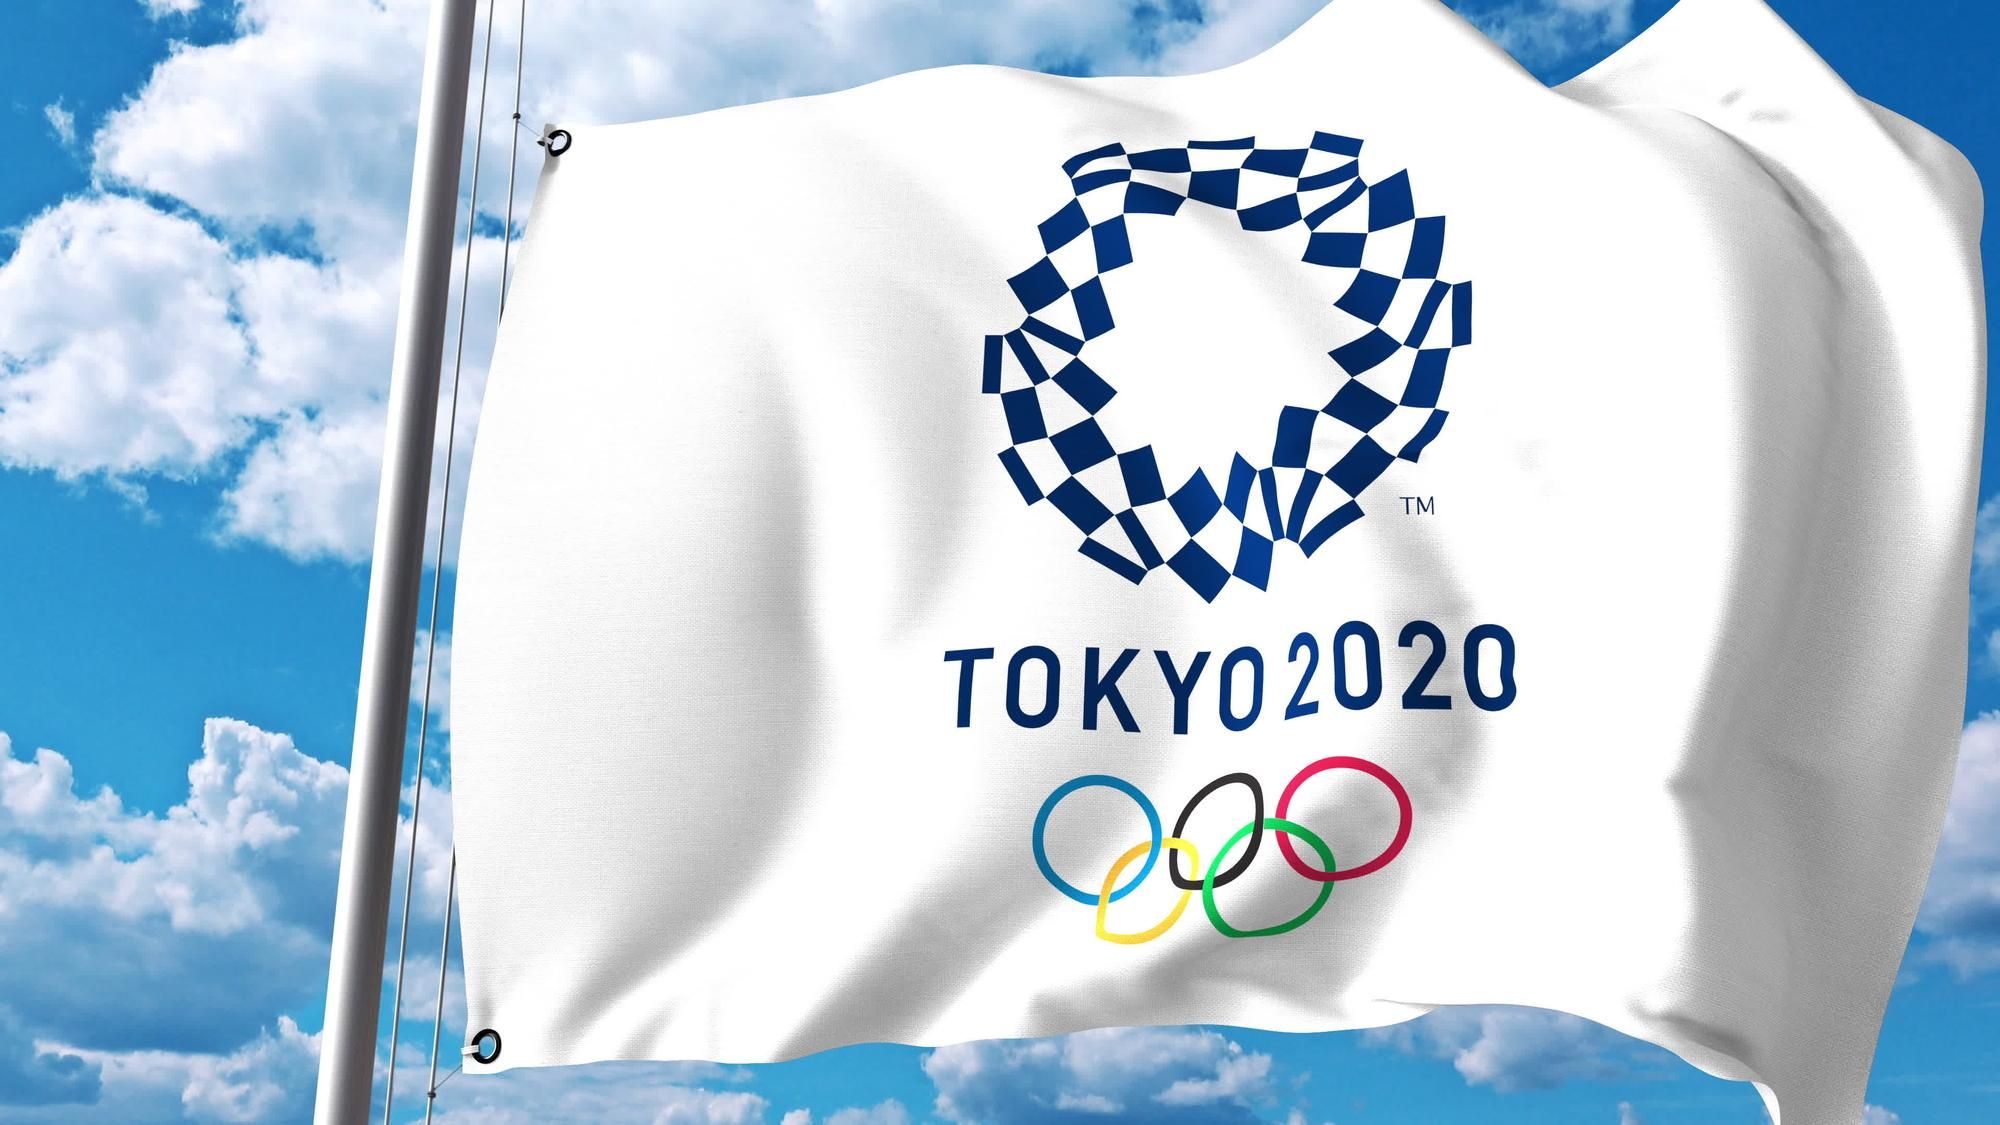 Tokyo 2020 tickets are not being refunded despite U.S. ticketholders not being able to attend, a class action lawsuit claims.